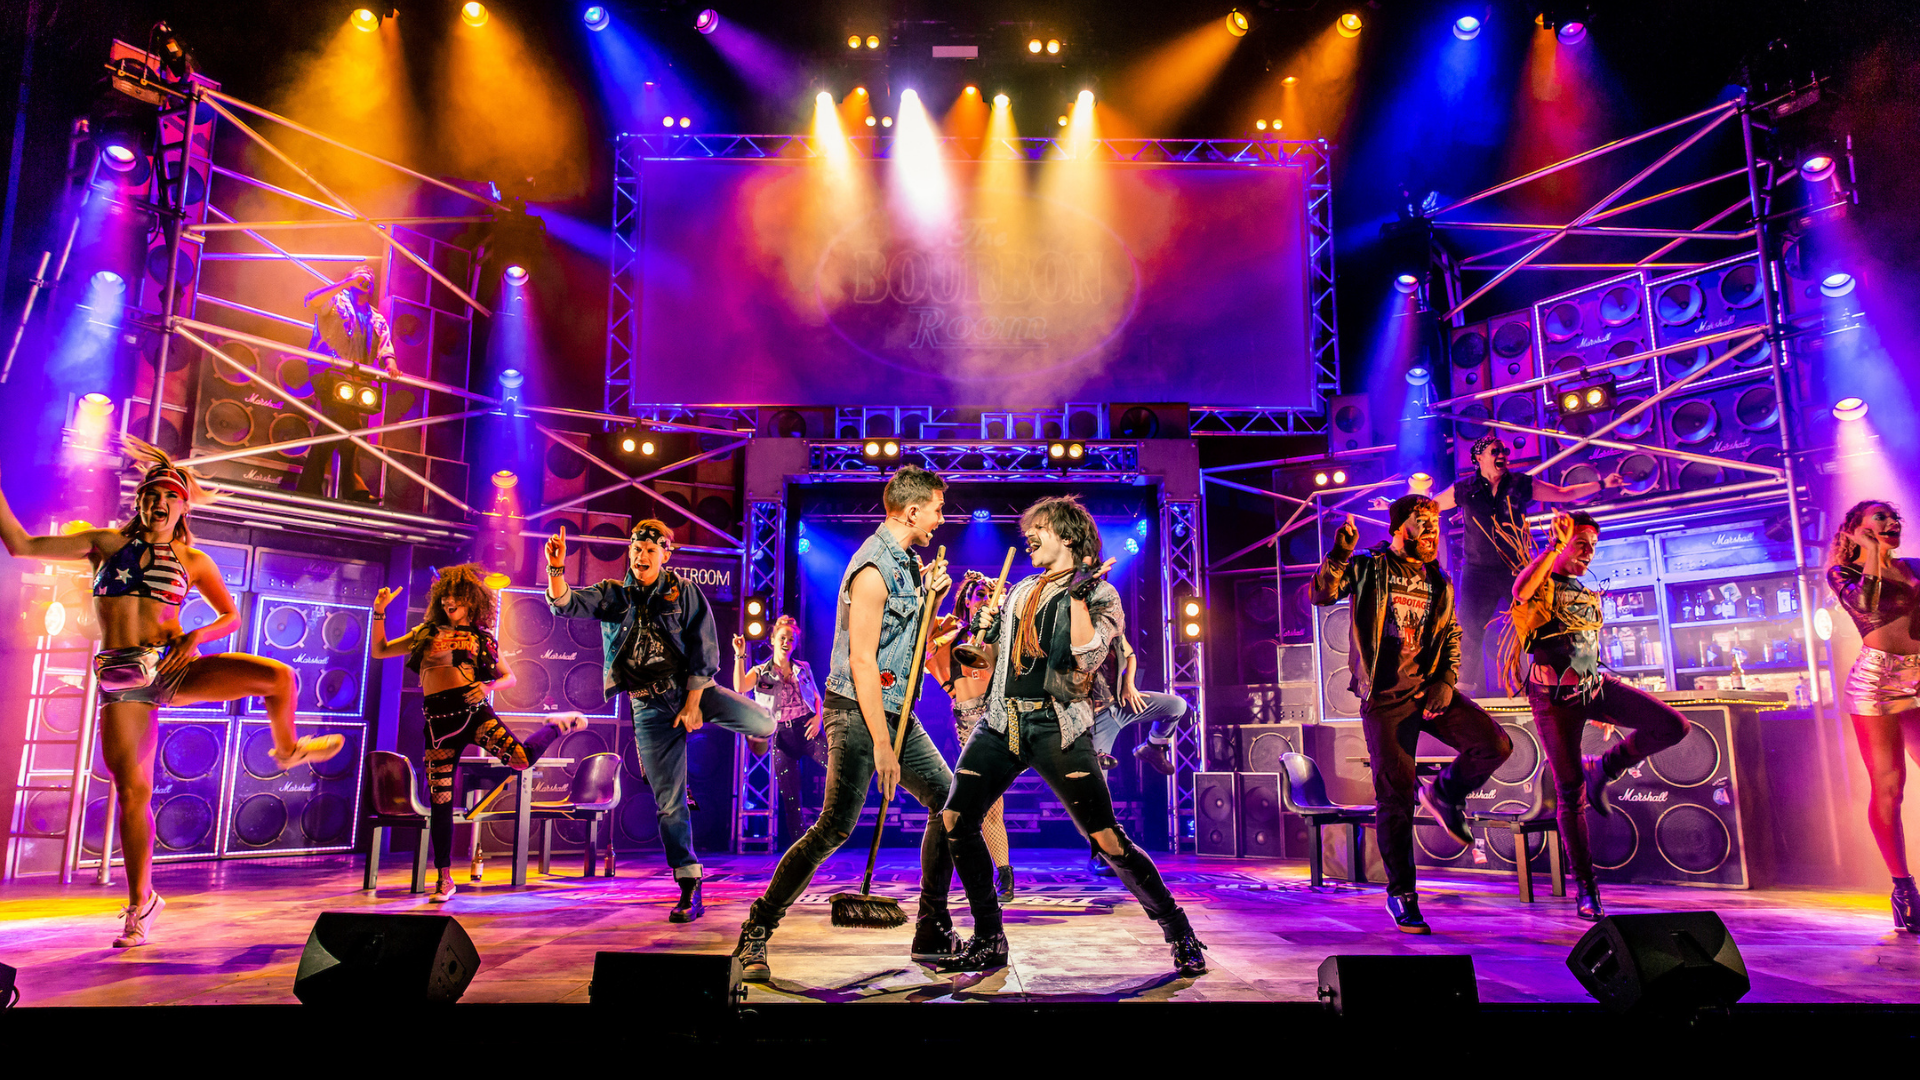 Rock of Ages 2018/19 tour production shot: Two male performers stand face to face, singing, while others dance in the background